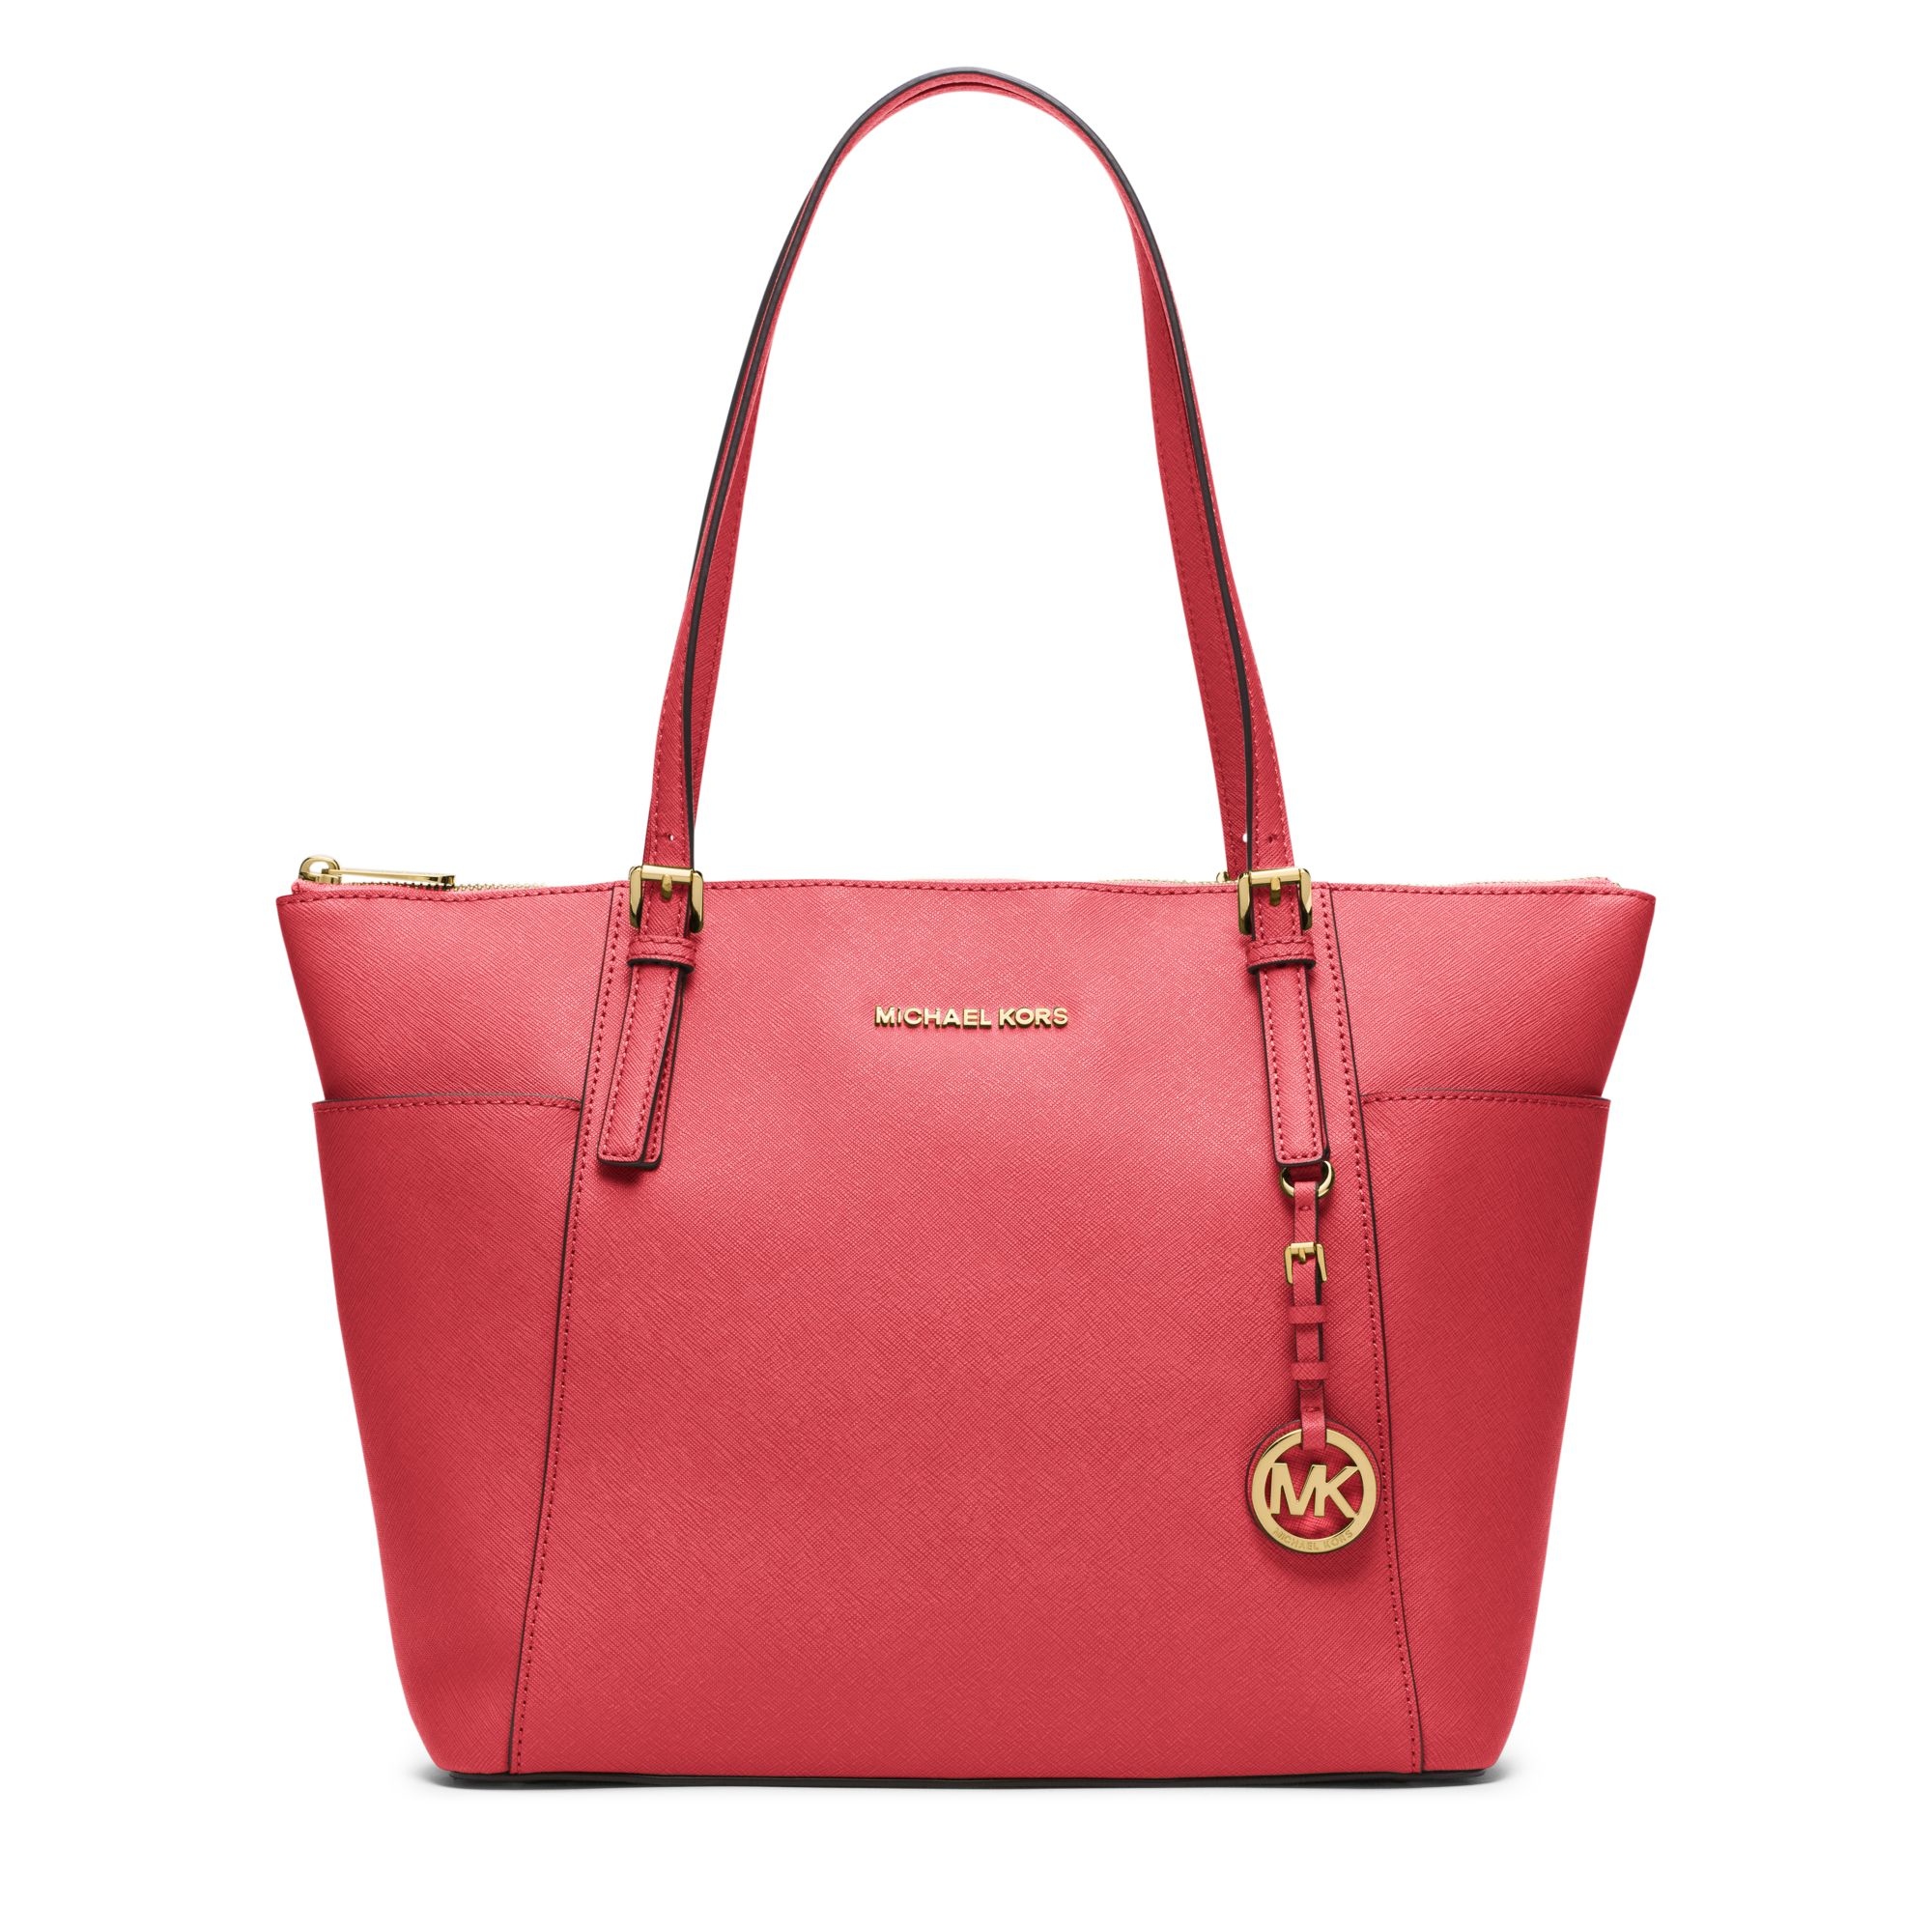 Michael kors Jet Set Large Top-zip Saffiano Leather Tote in Red ...